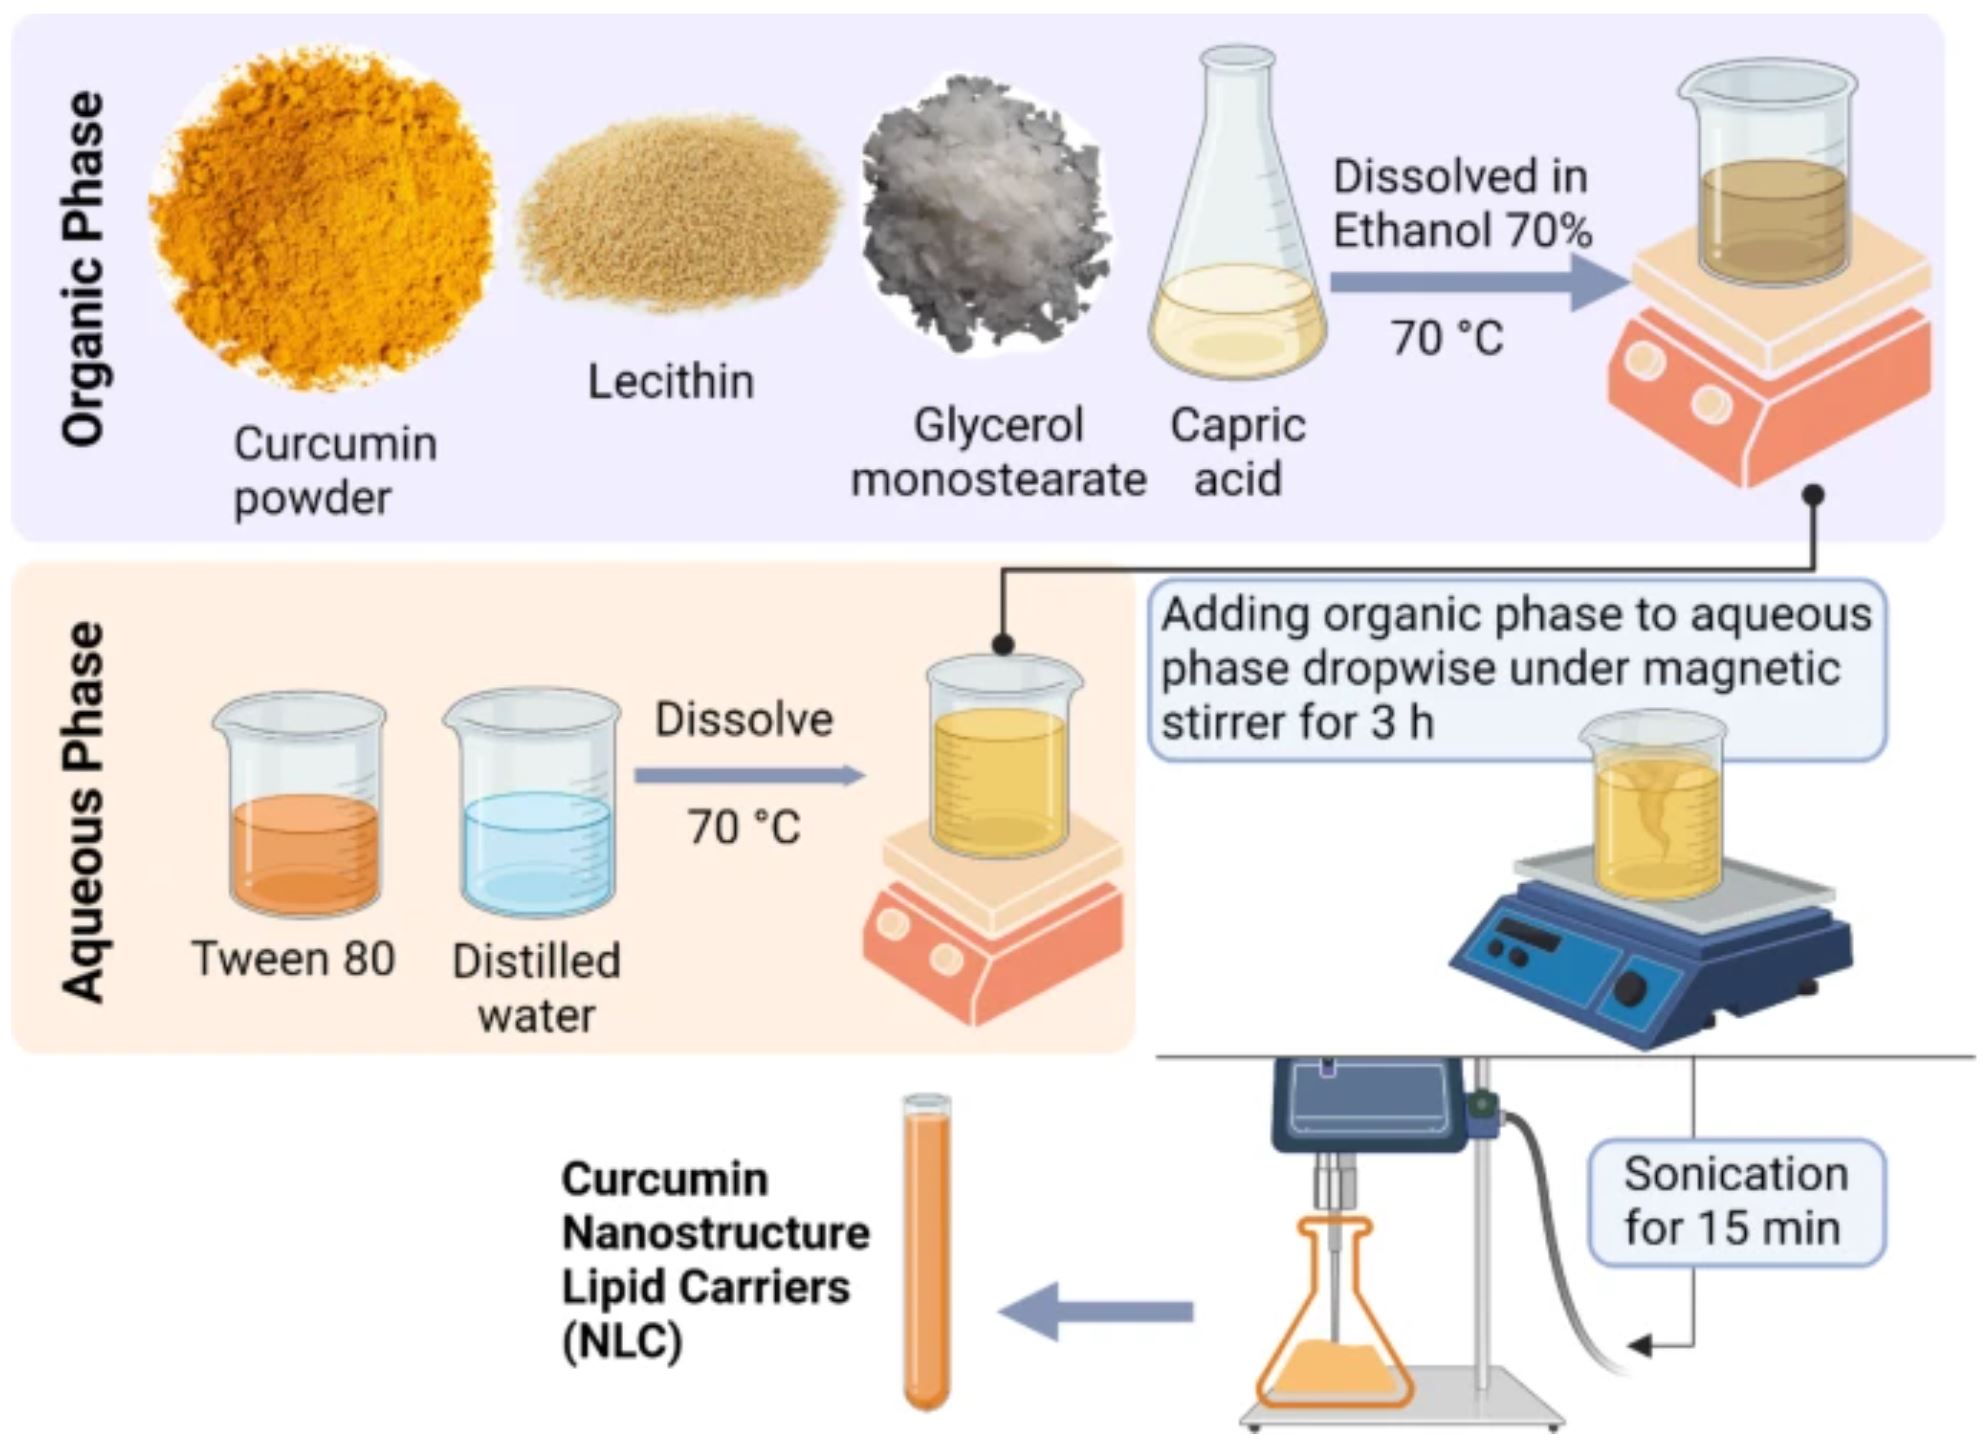 Preparation of Curcumin Nanostructured Lipid Carriers (NLCs) using emulsion-evaporation-solidification method. Created with BioRender.com